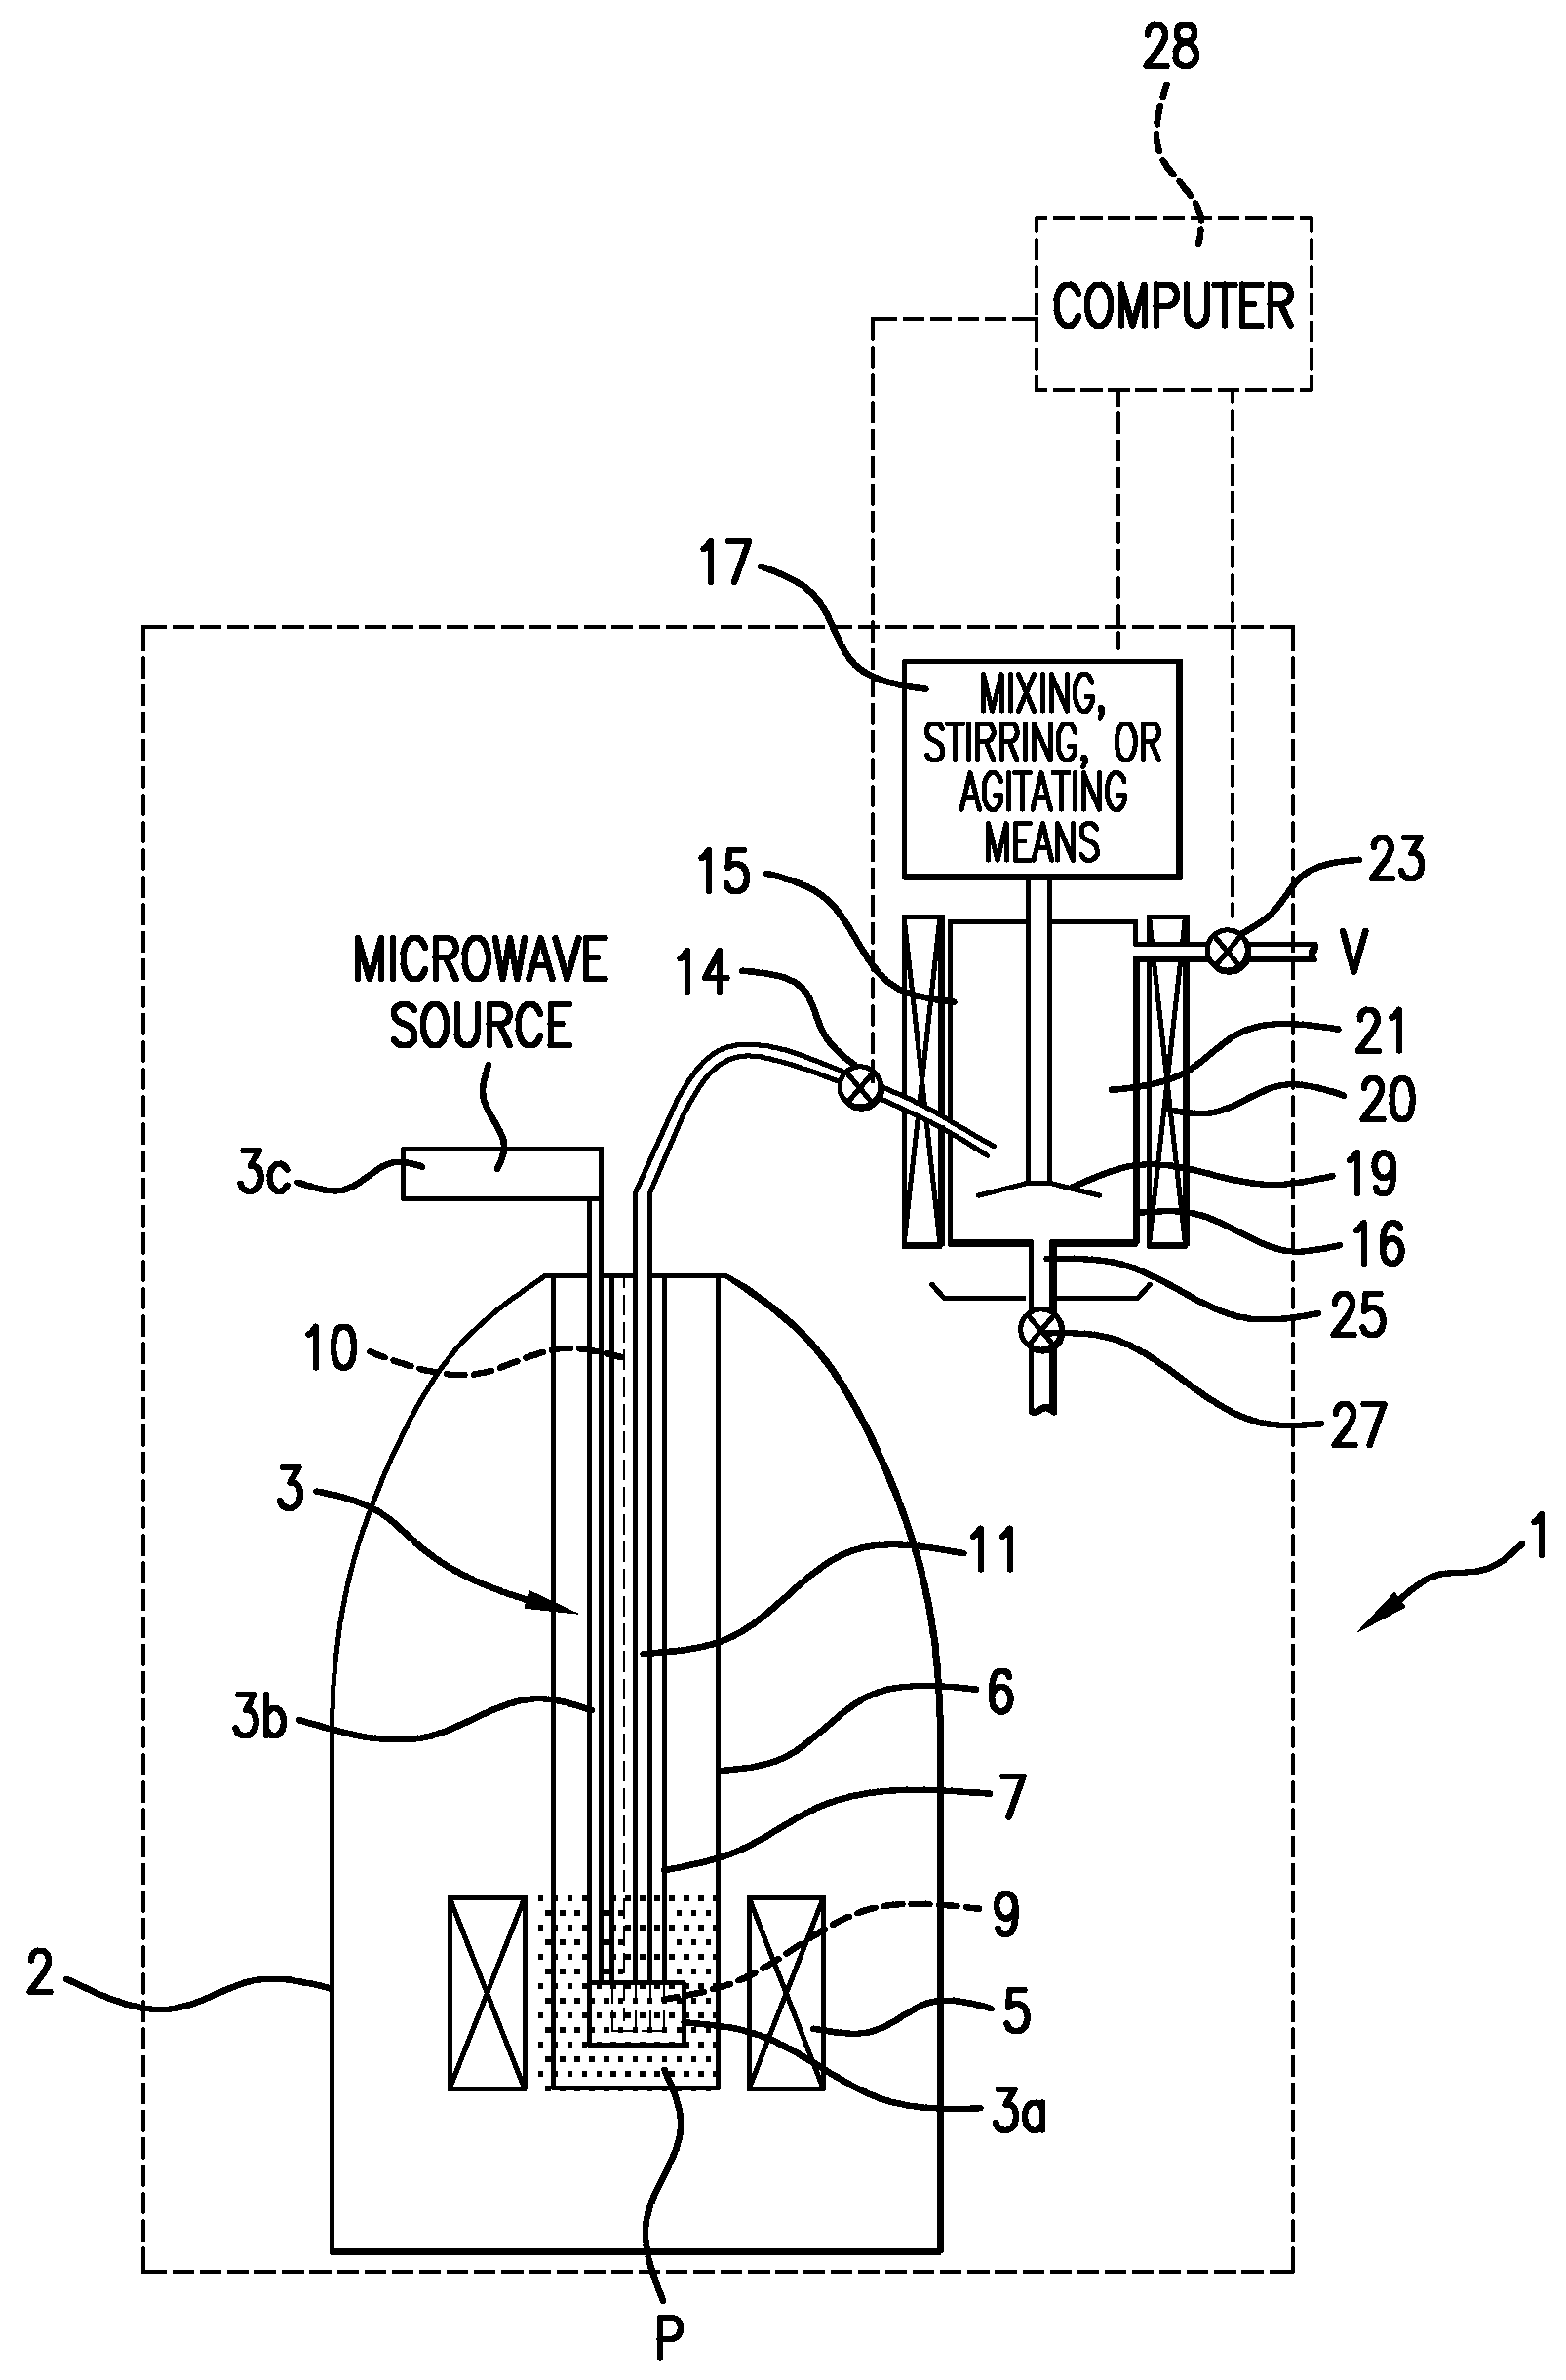 Methods and devices configured for dissolving hyperpolarised solid material with a solvent within a cryostat for NMR analyses